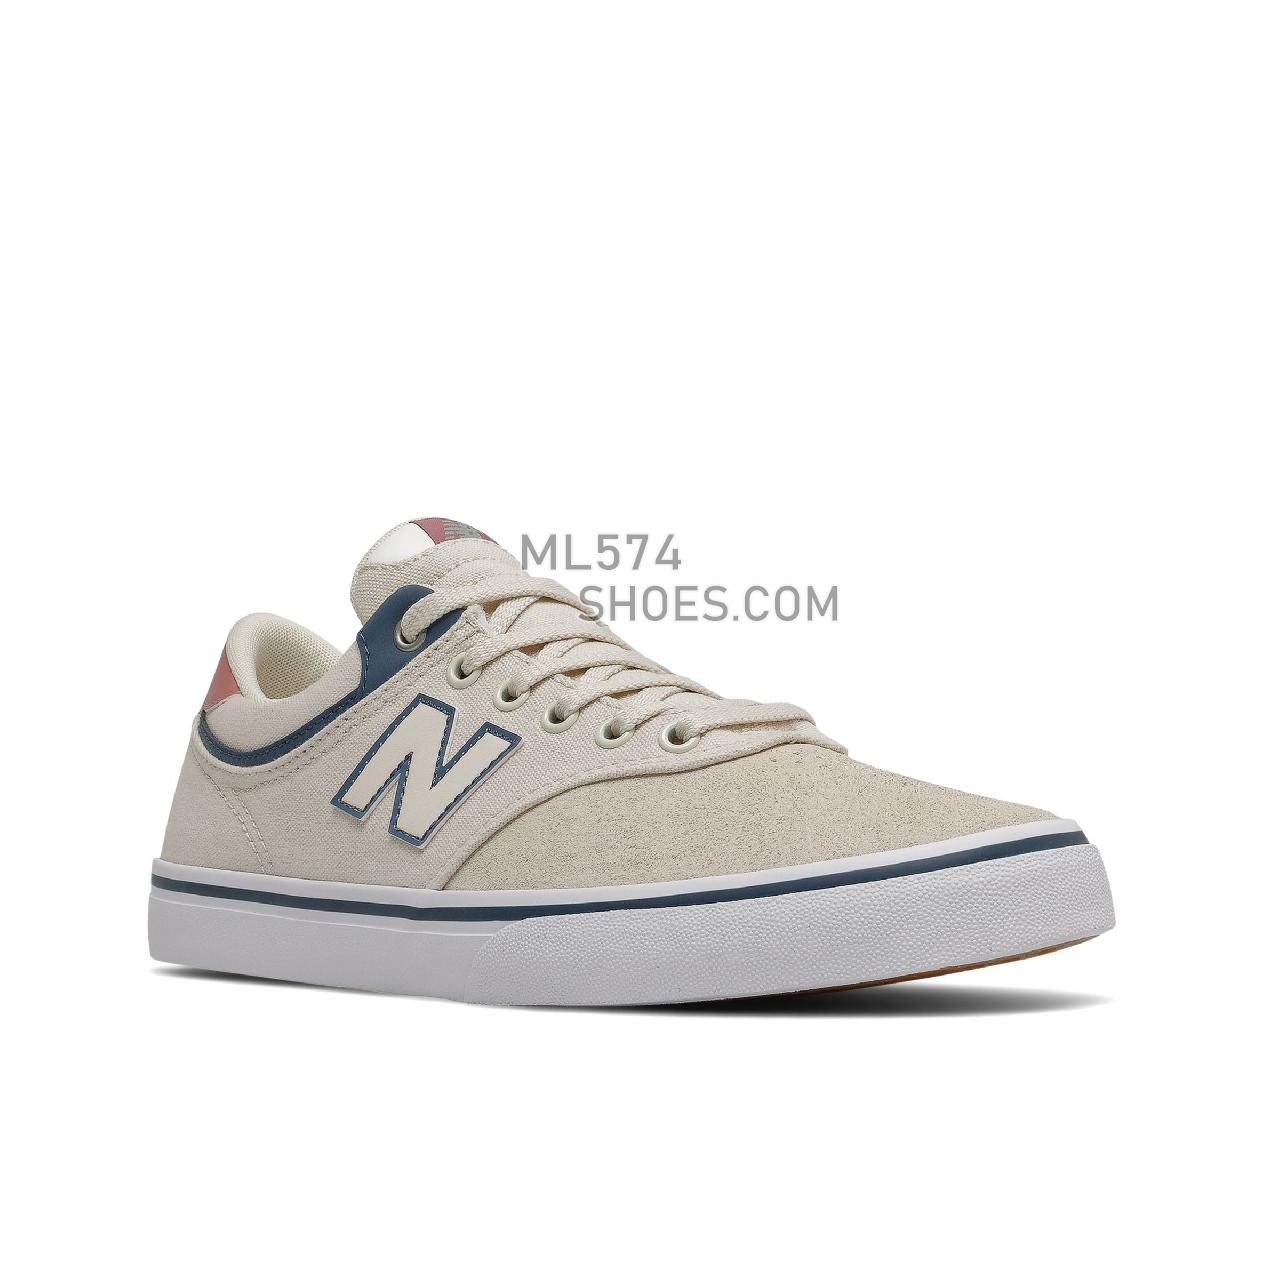 New Balance NB NUMERIC 255 - Men's NB Numeric Skate - White with Grey - NM255SRP